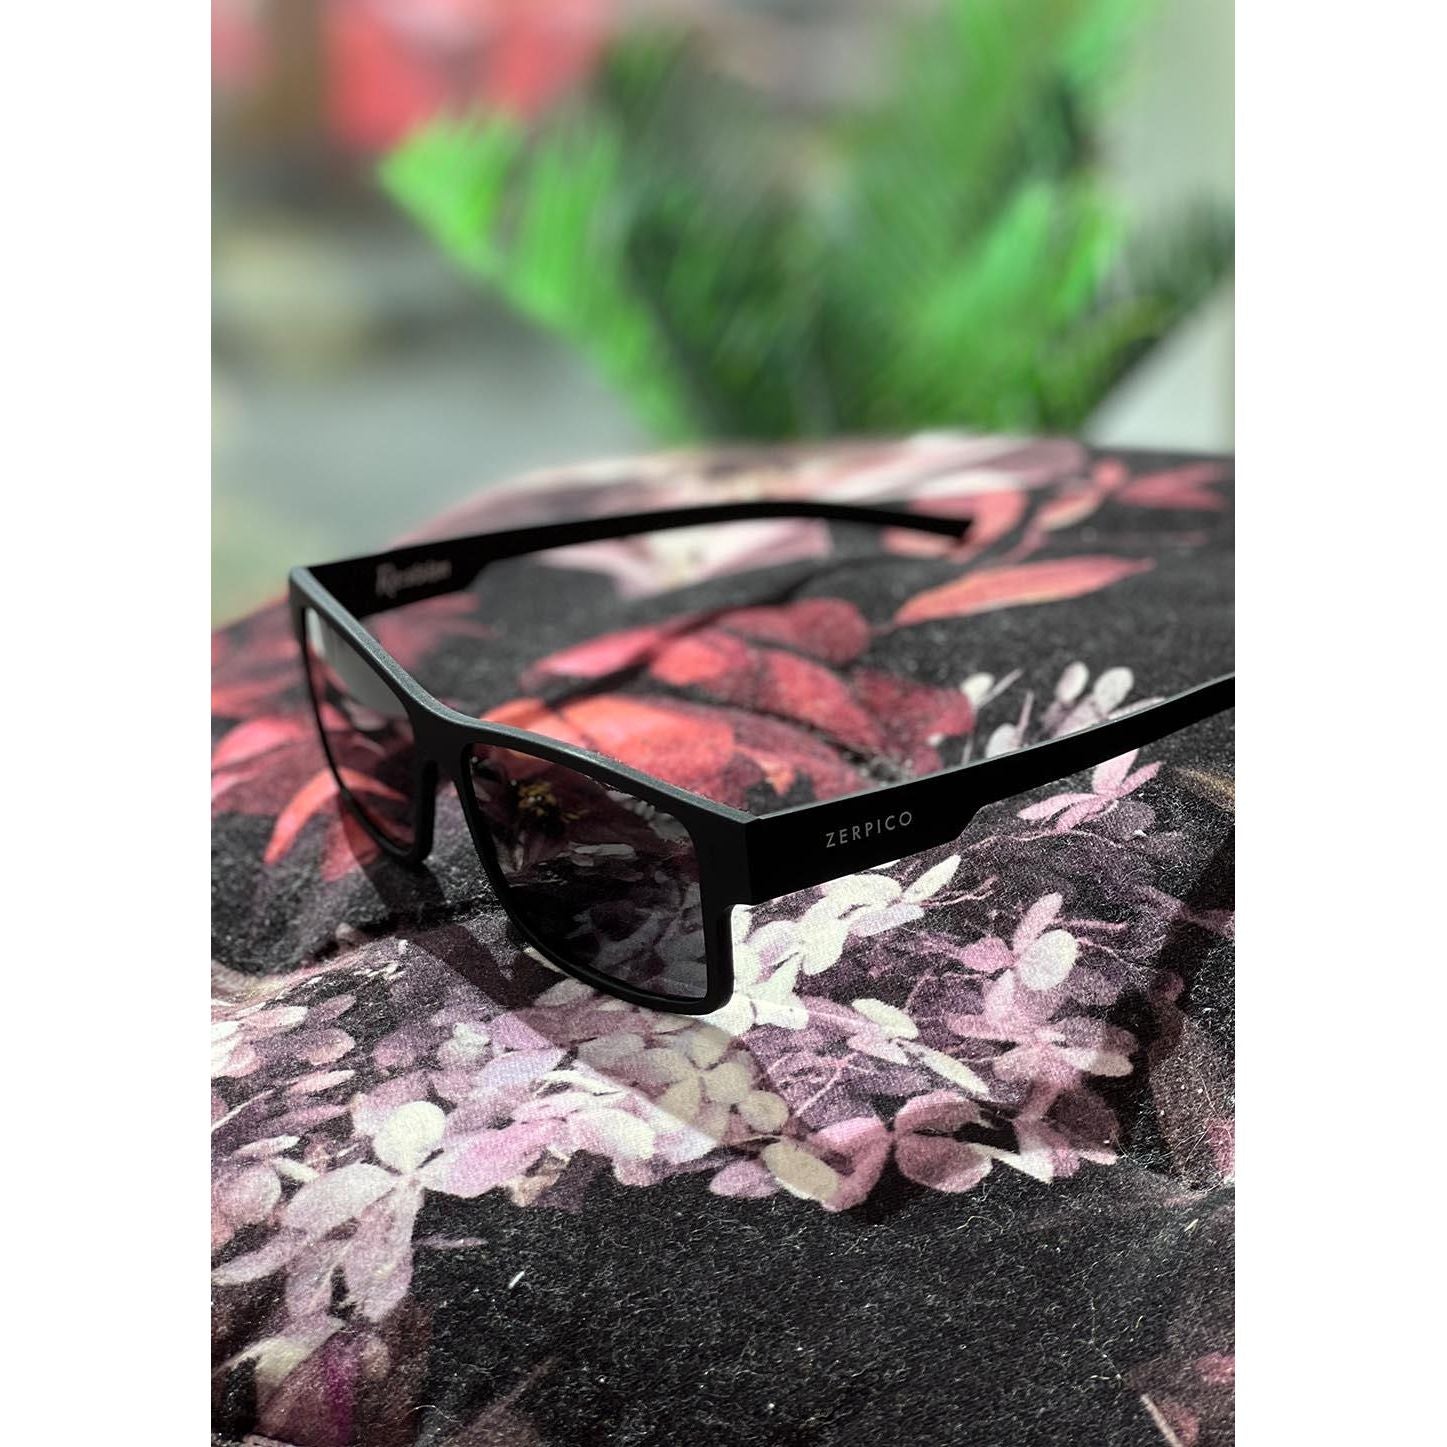 ReVision Square - Eco-Friendly Recyclable Paper Sunglasses - KME means the very best